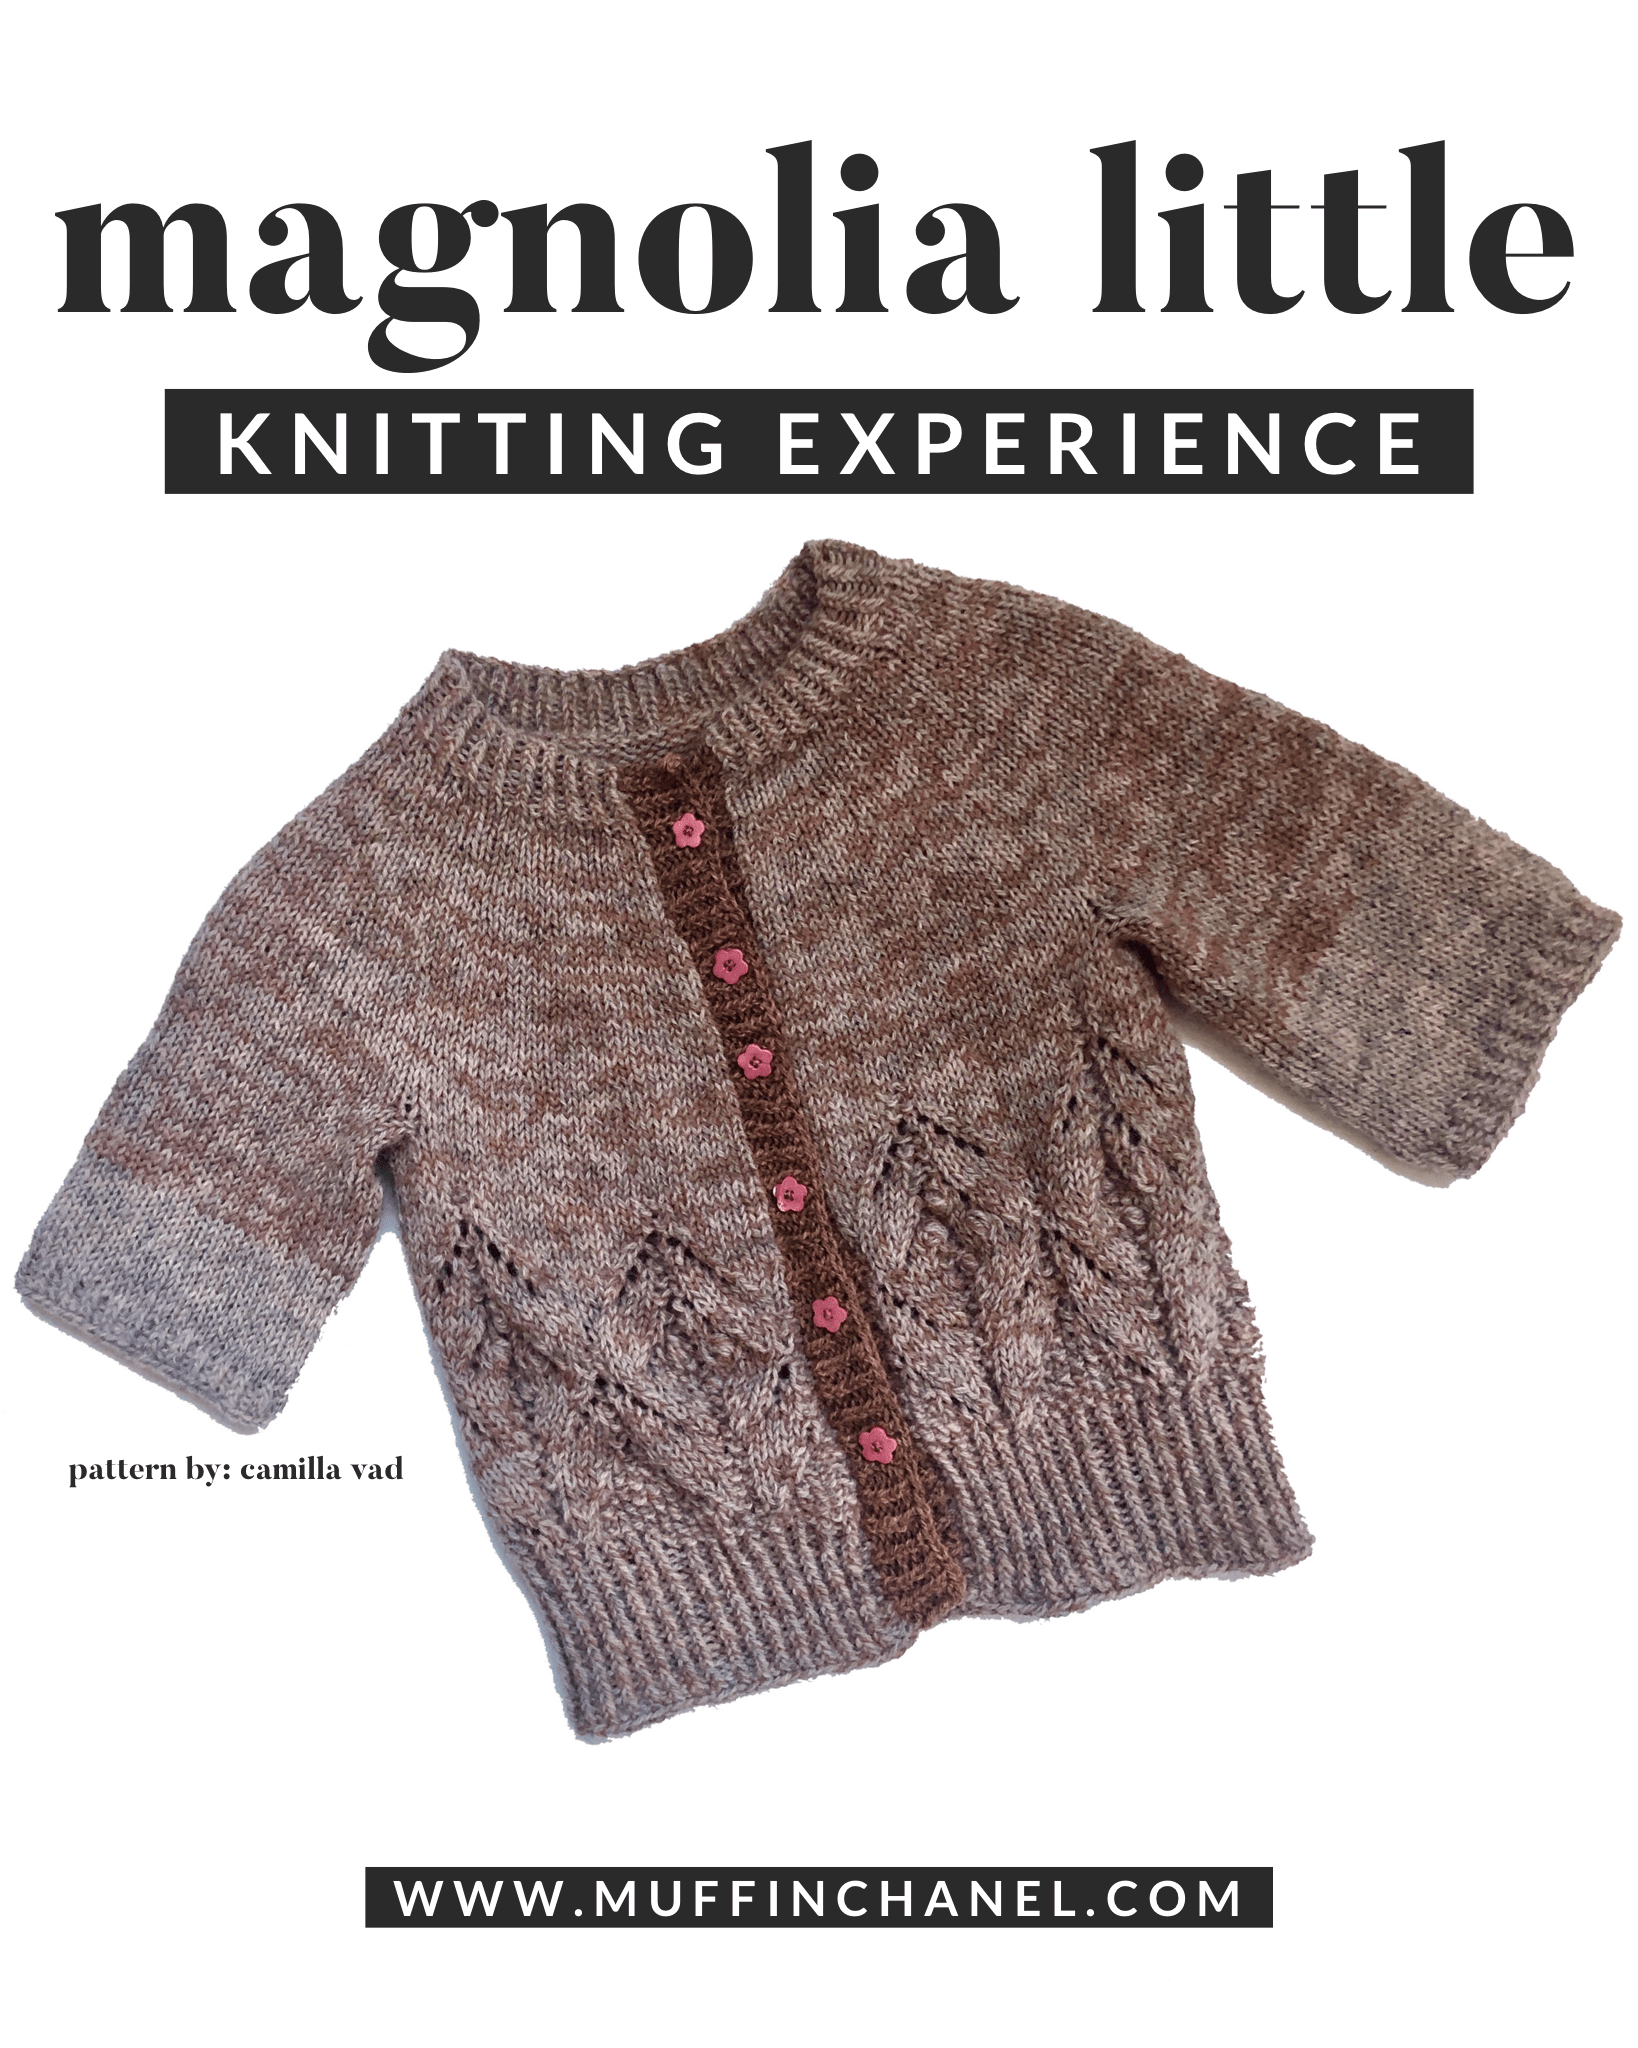 Imidlertid svimmelhed Sequel Magnolia Little | Knitting Experience - MuffinChanel